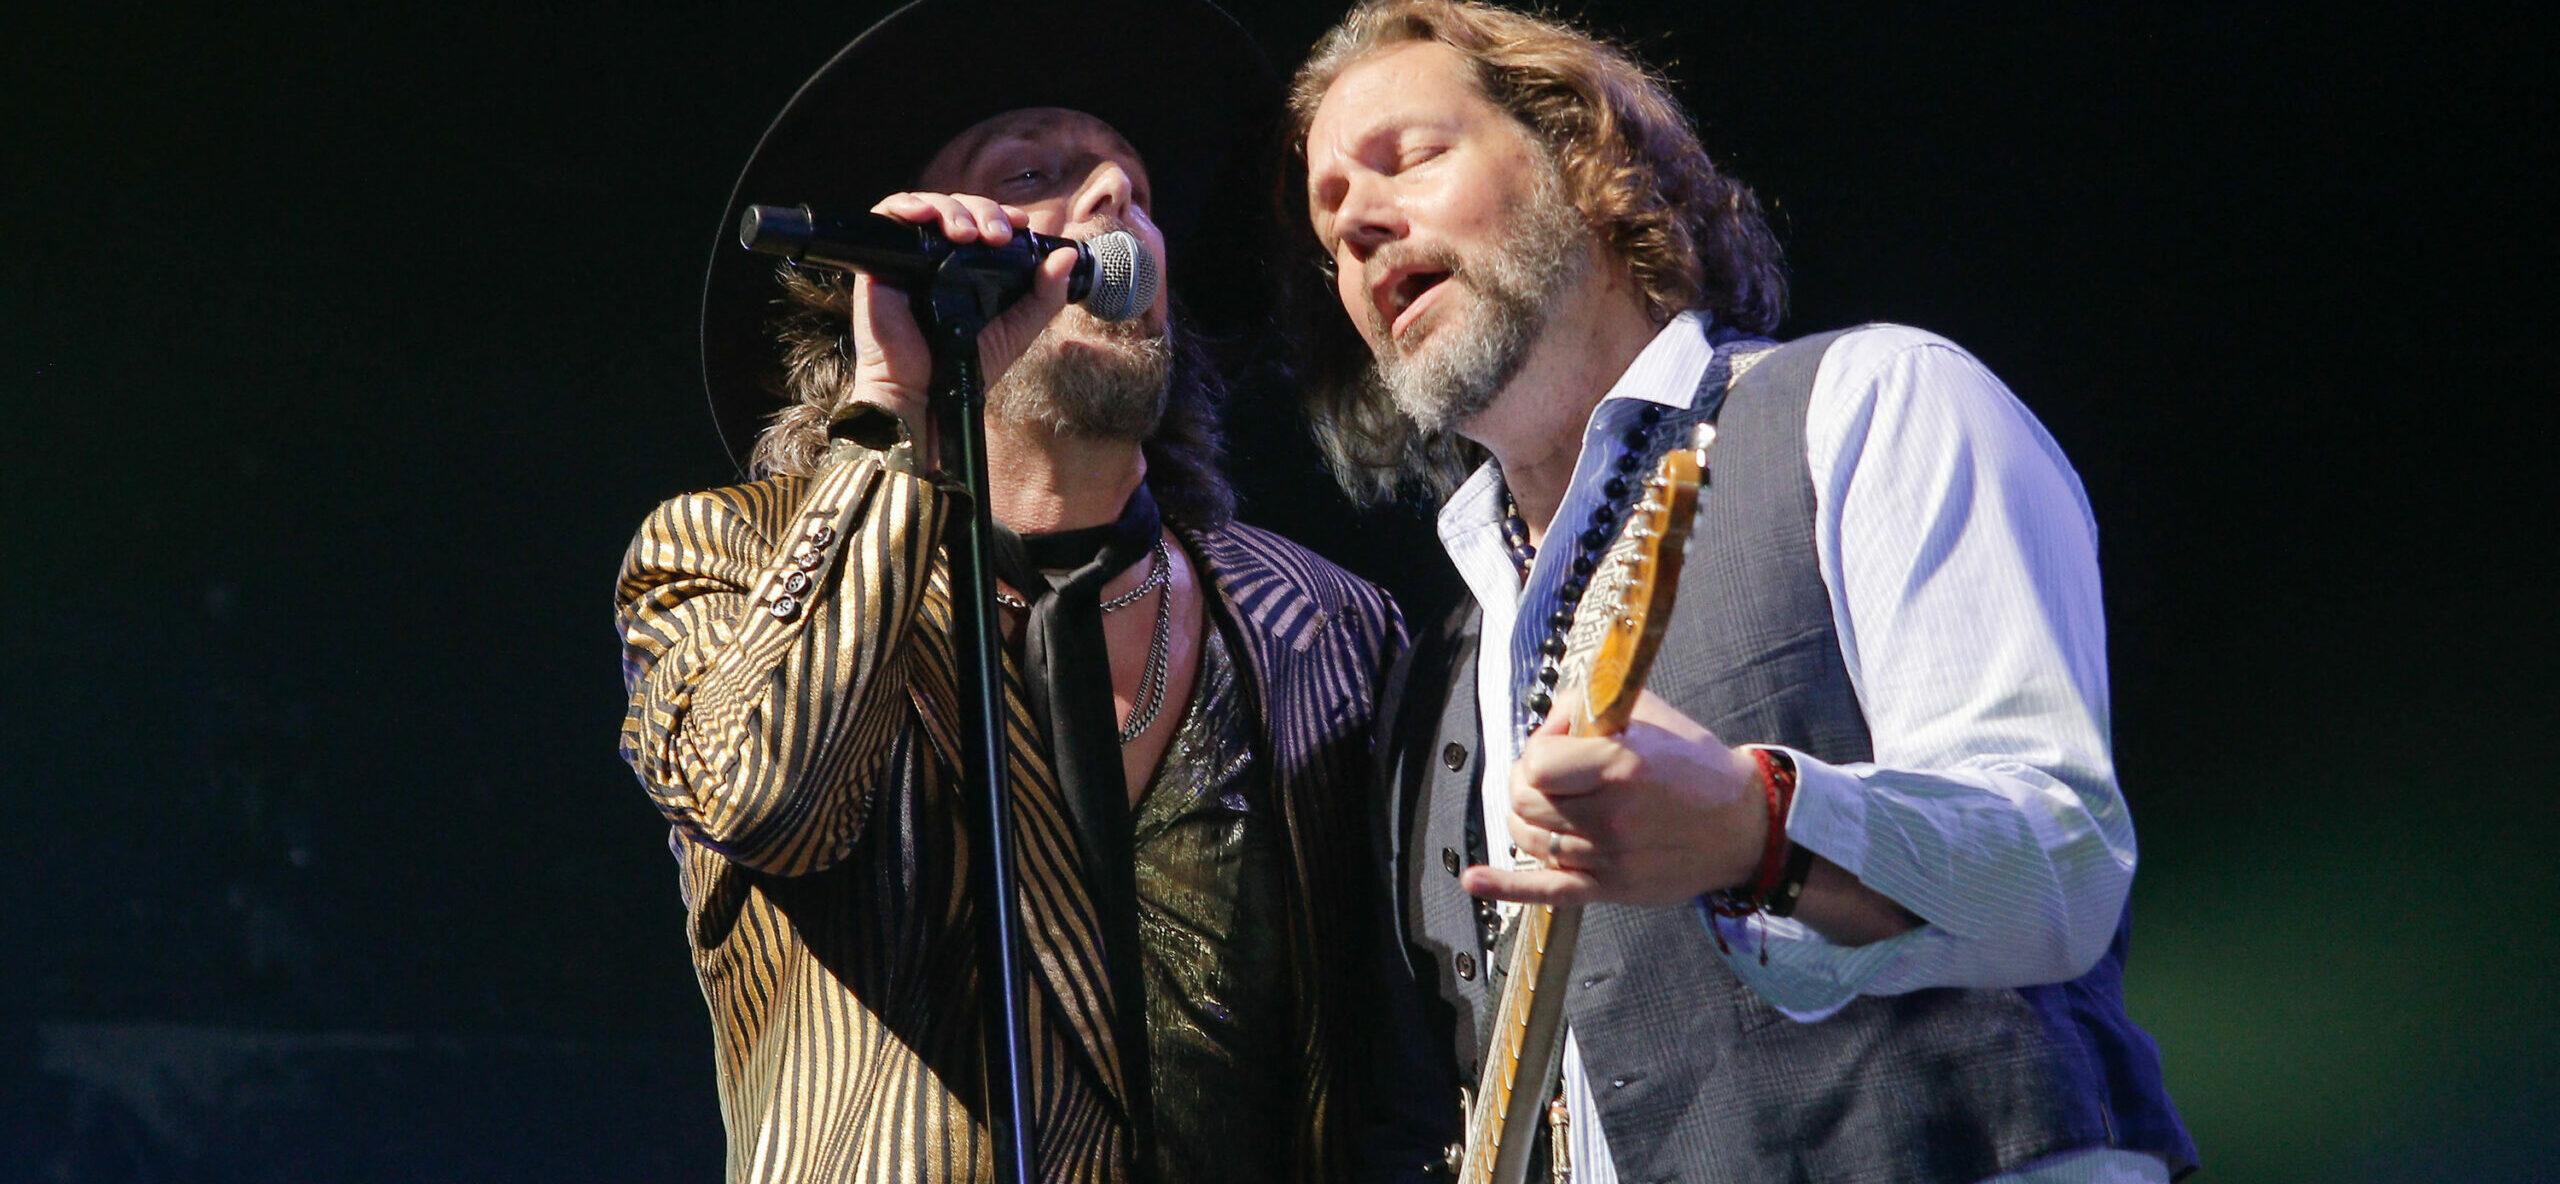 ‘Black Crowes’ Settle Lawsuit With Former Drummer Over Music Royalties